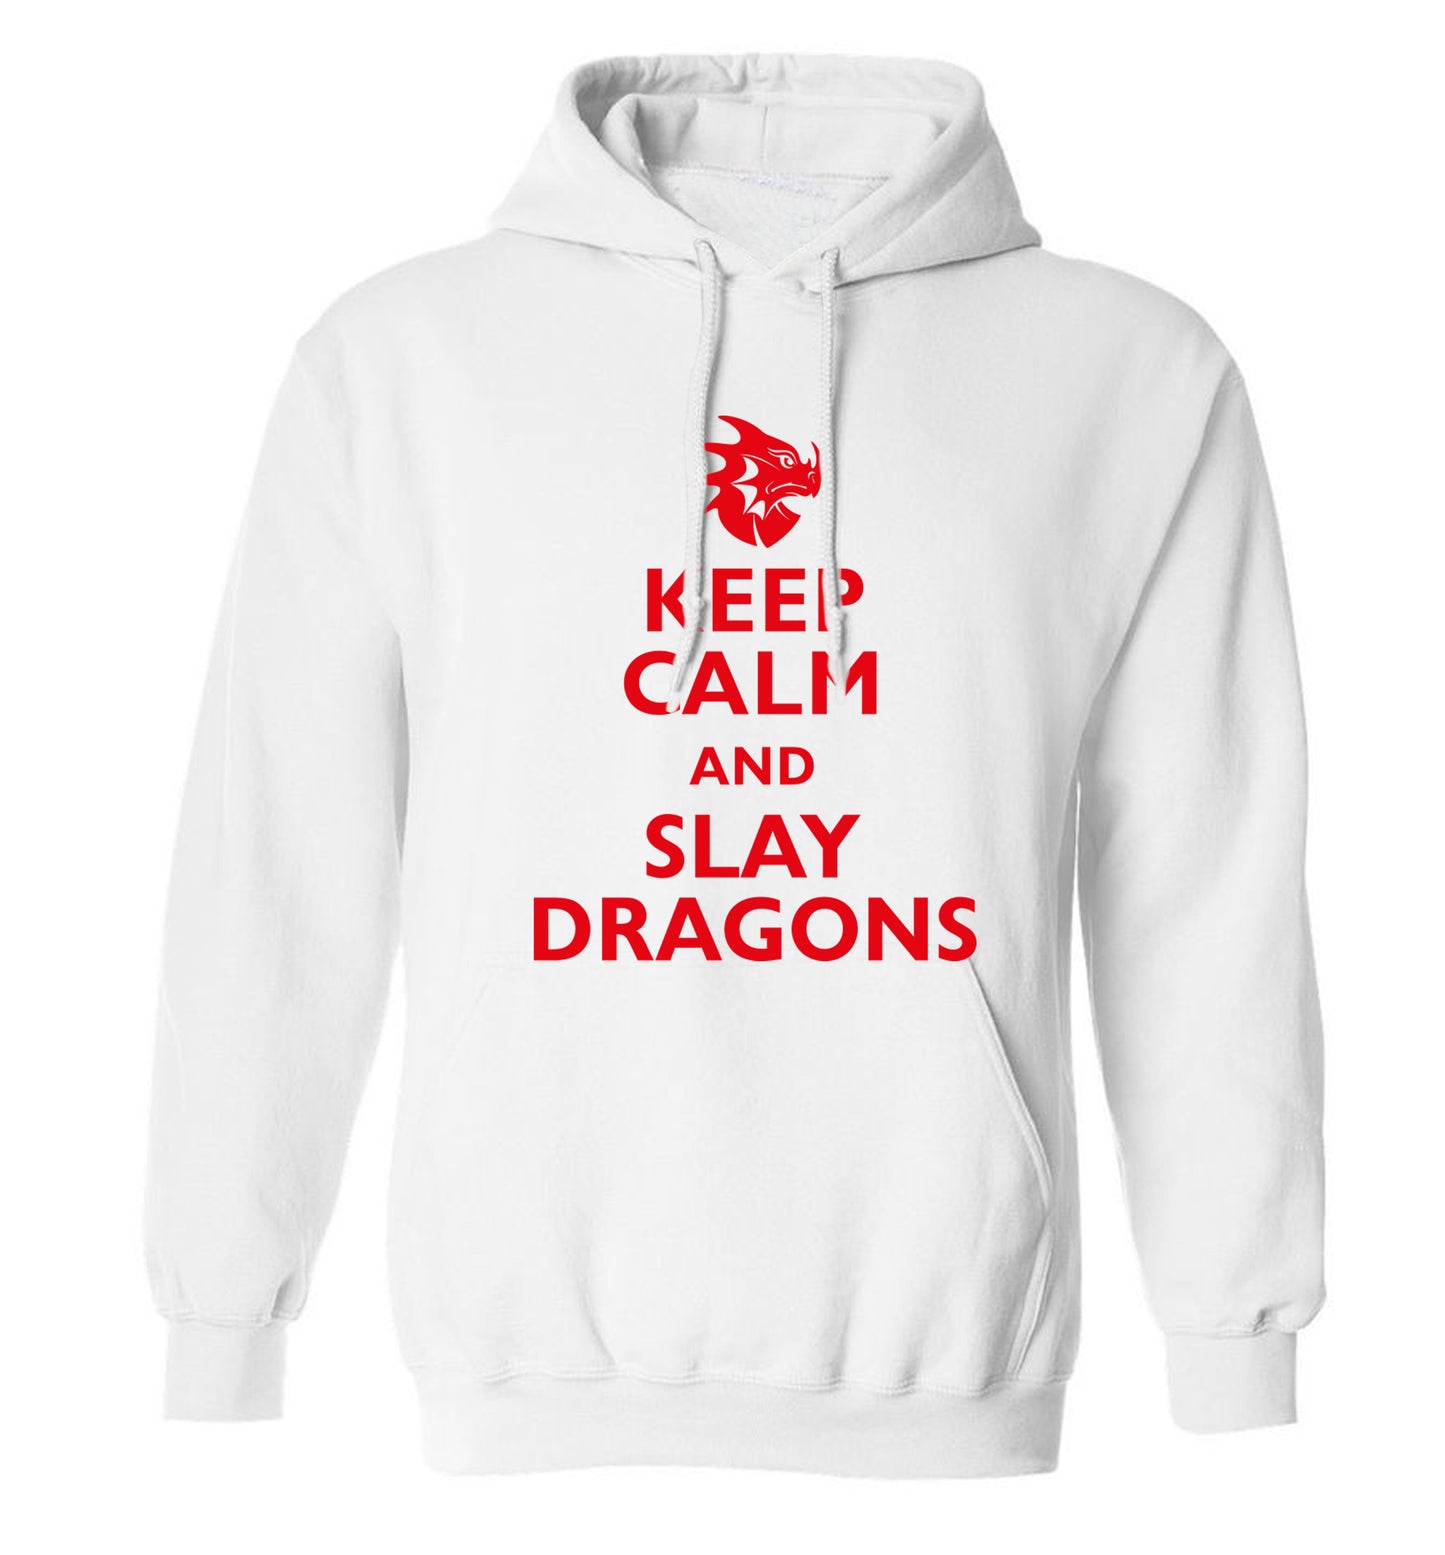 Keep calm and slay dragons adults unisex white hoodie 2XL